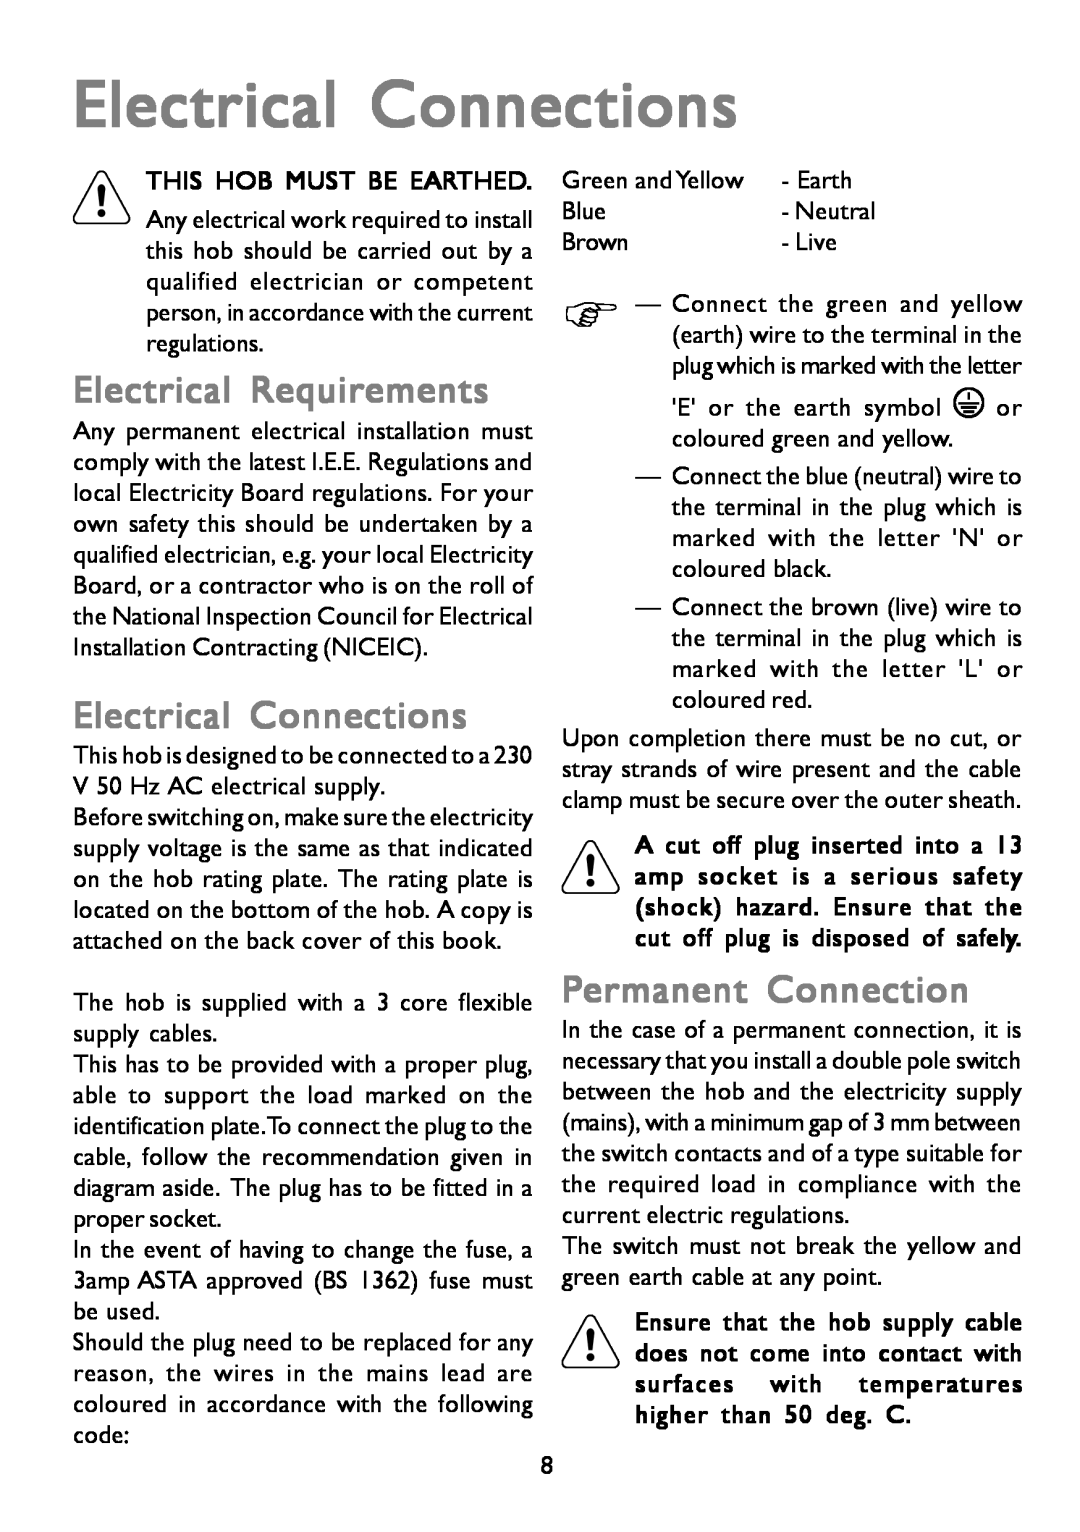 John Lewis JLBIGH753 instruction manual Electrical Requirements, Electrical Connections, Permanent Connection 